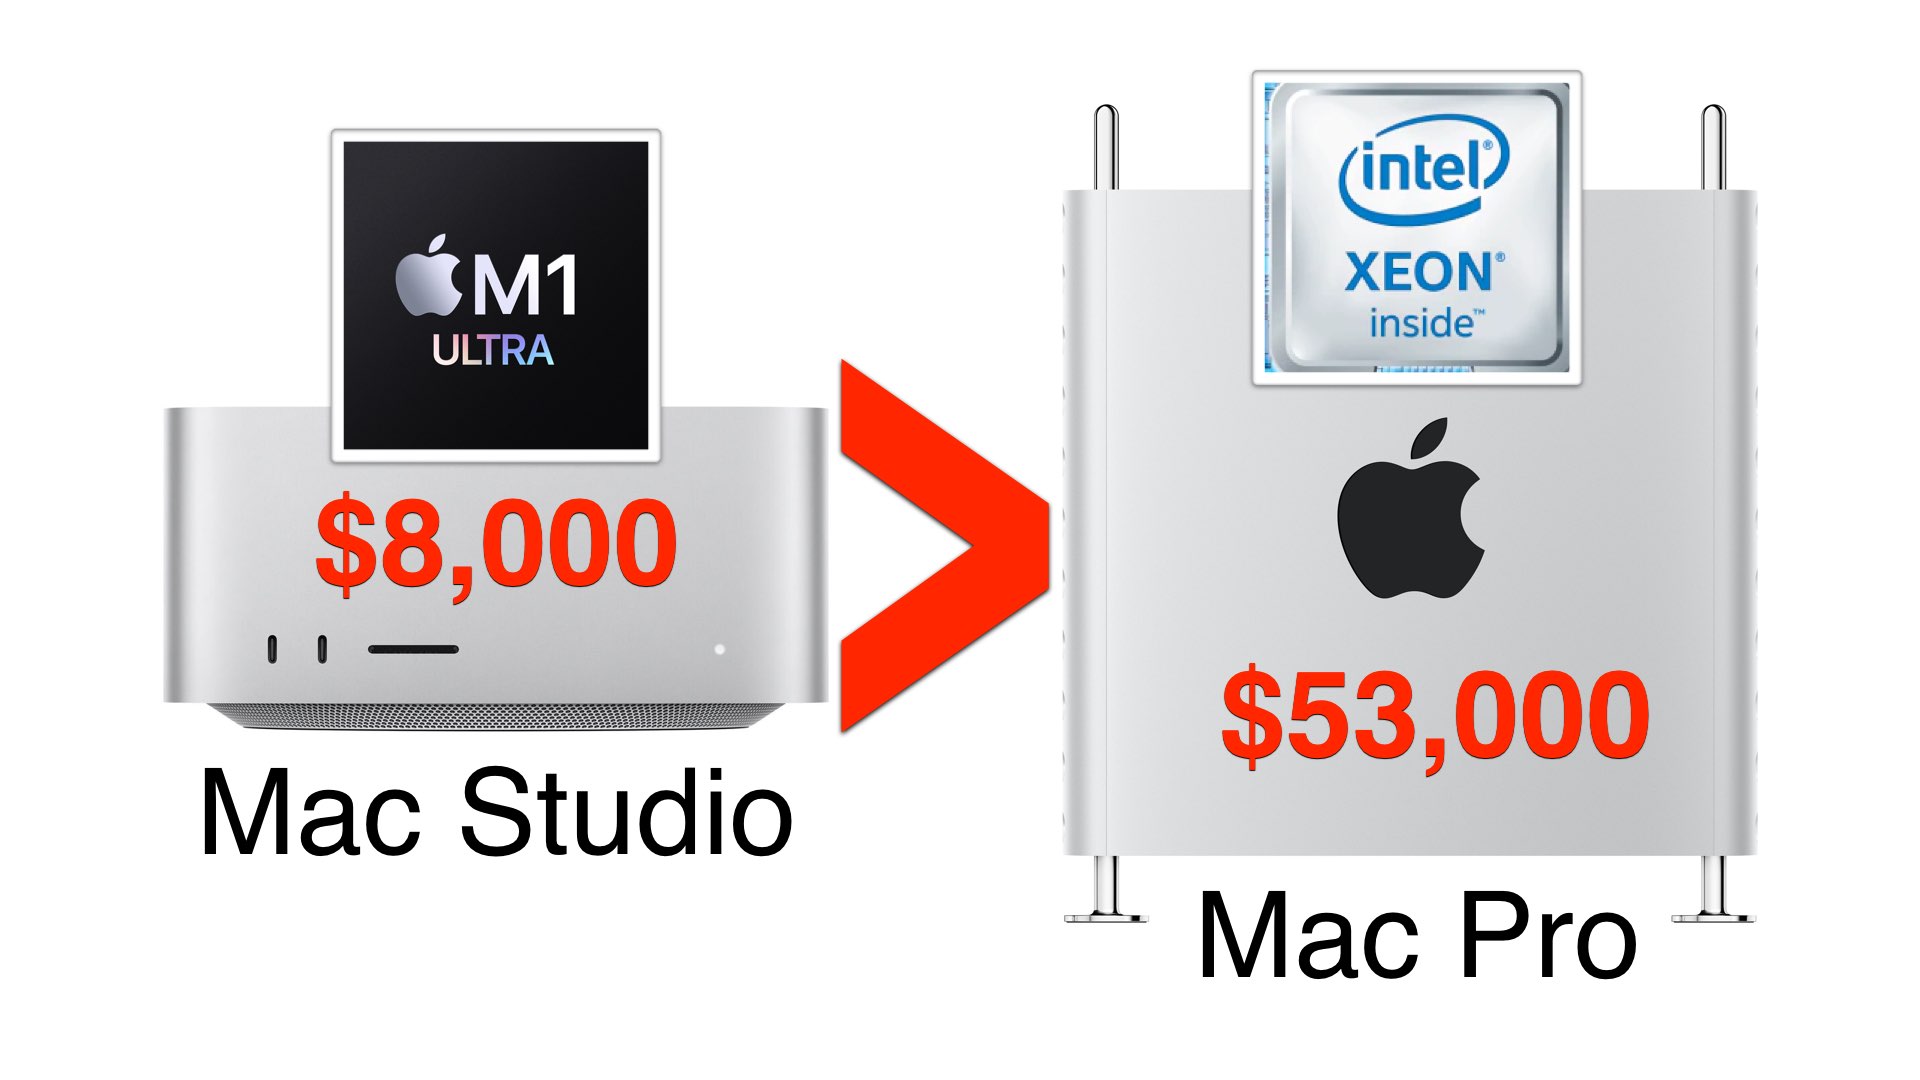 https://u7s8g8p6.rocketcdn.me/wp-content/uploads/2022/03/Apples-New-Mac-Studio-is-More-Powerful-Than-Mac-Pro-and-With-a-Fraction-of-the-Price.001.jpeg